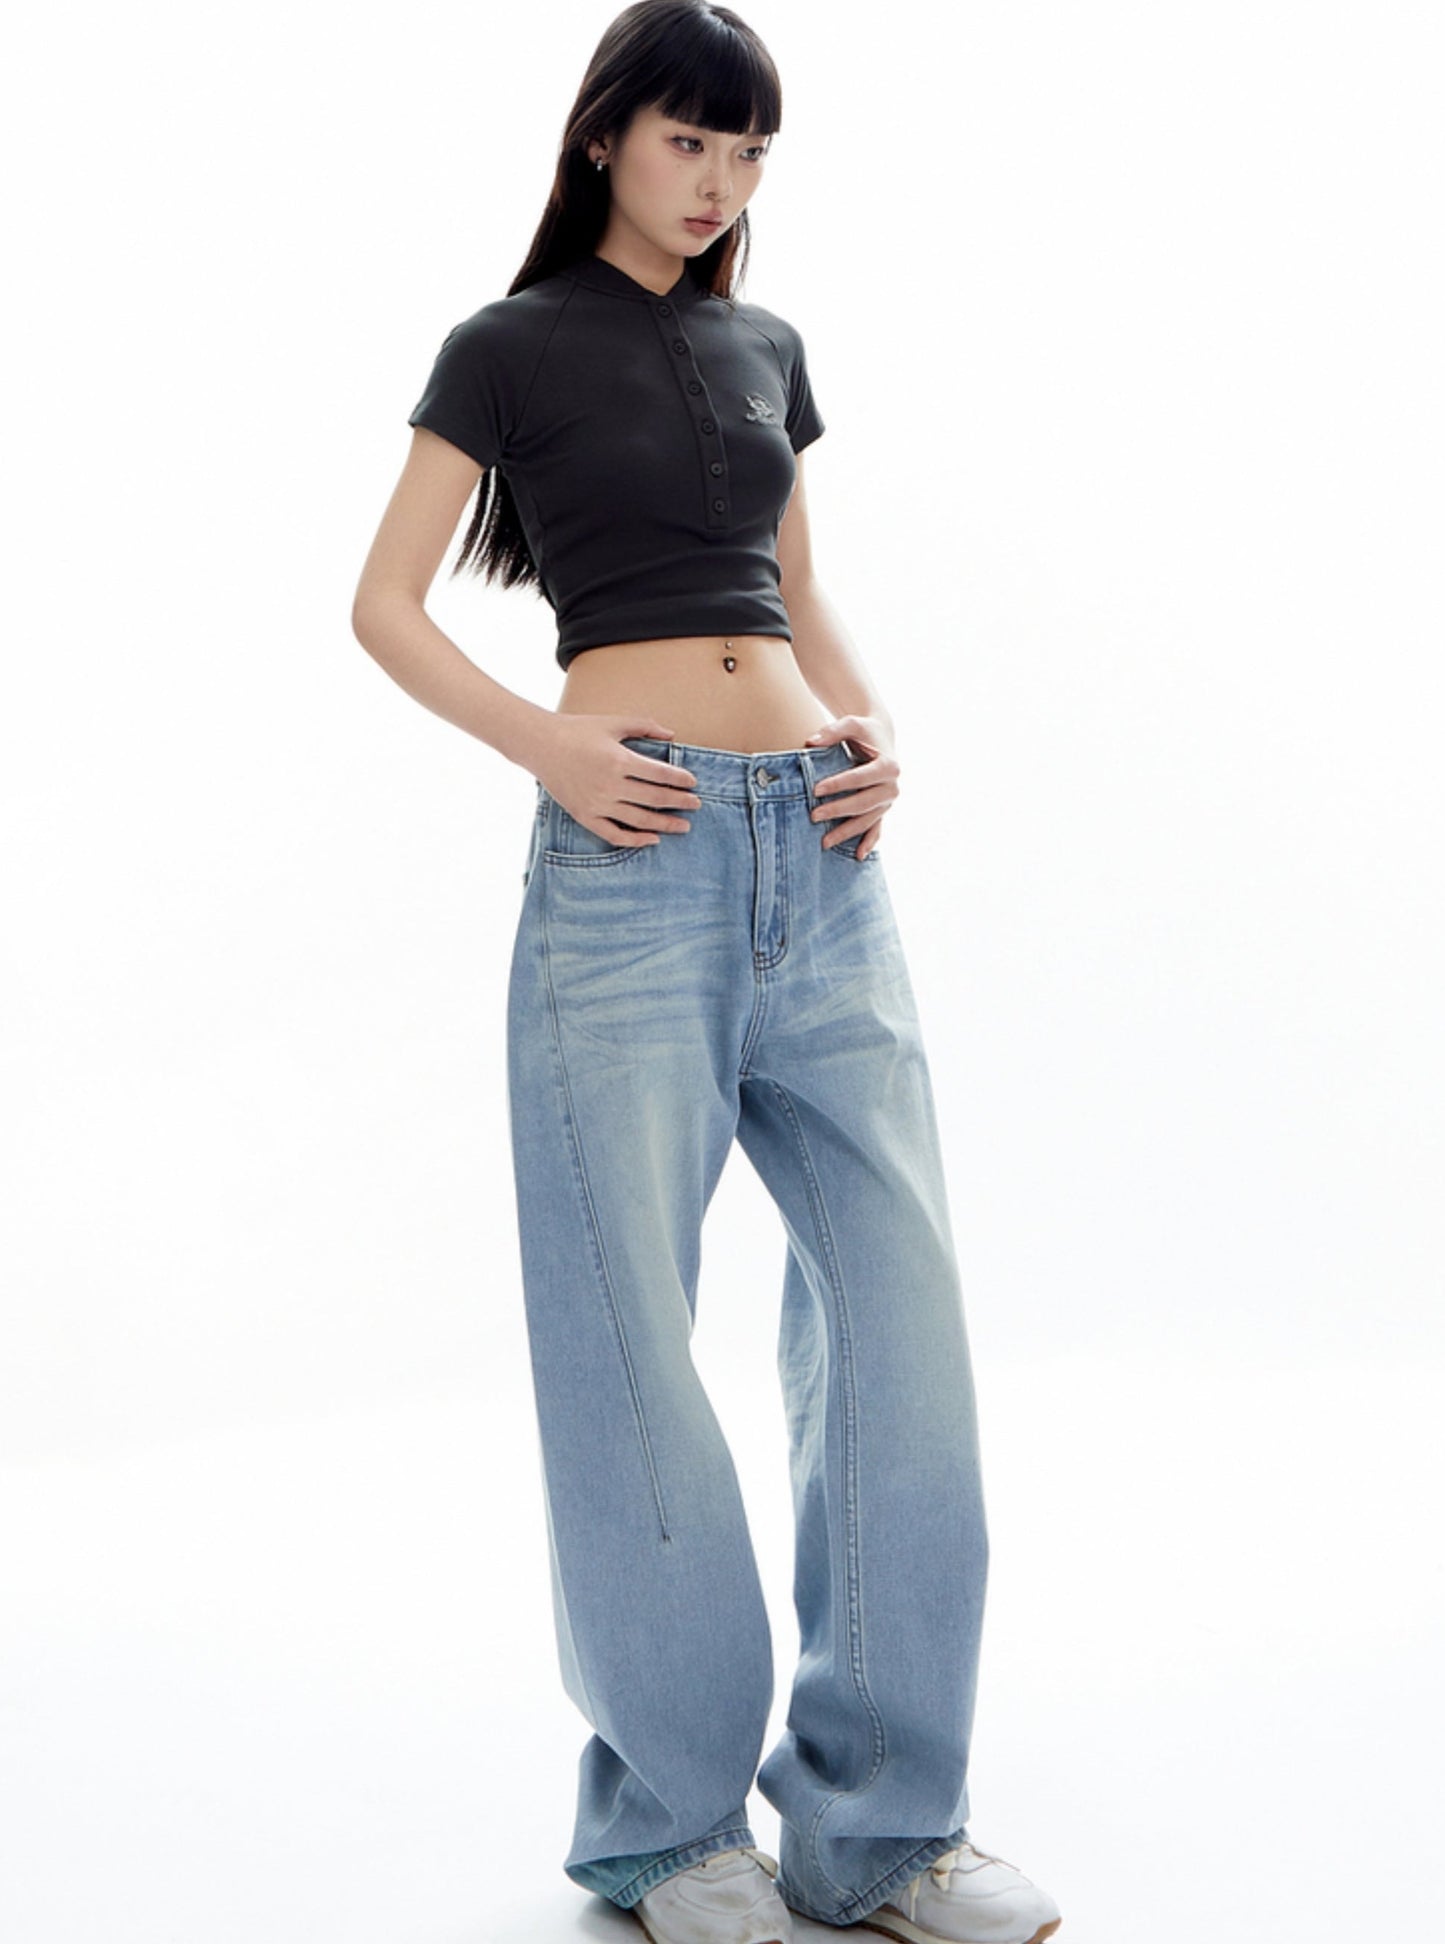 Old Washed Low Waist Straight Leg Pants